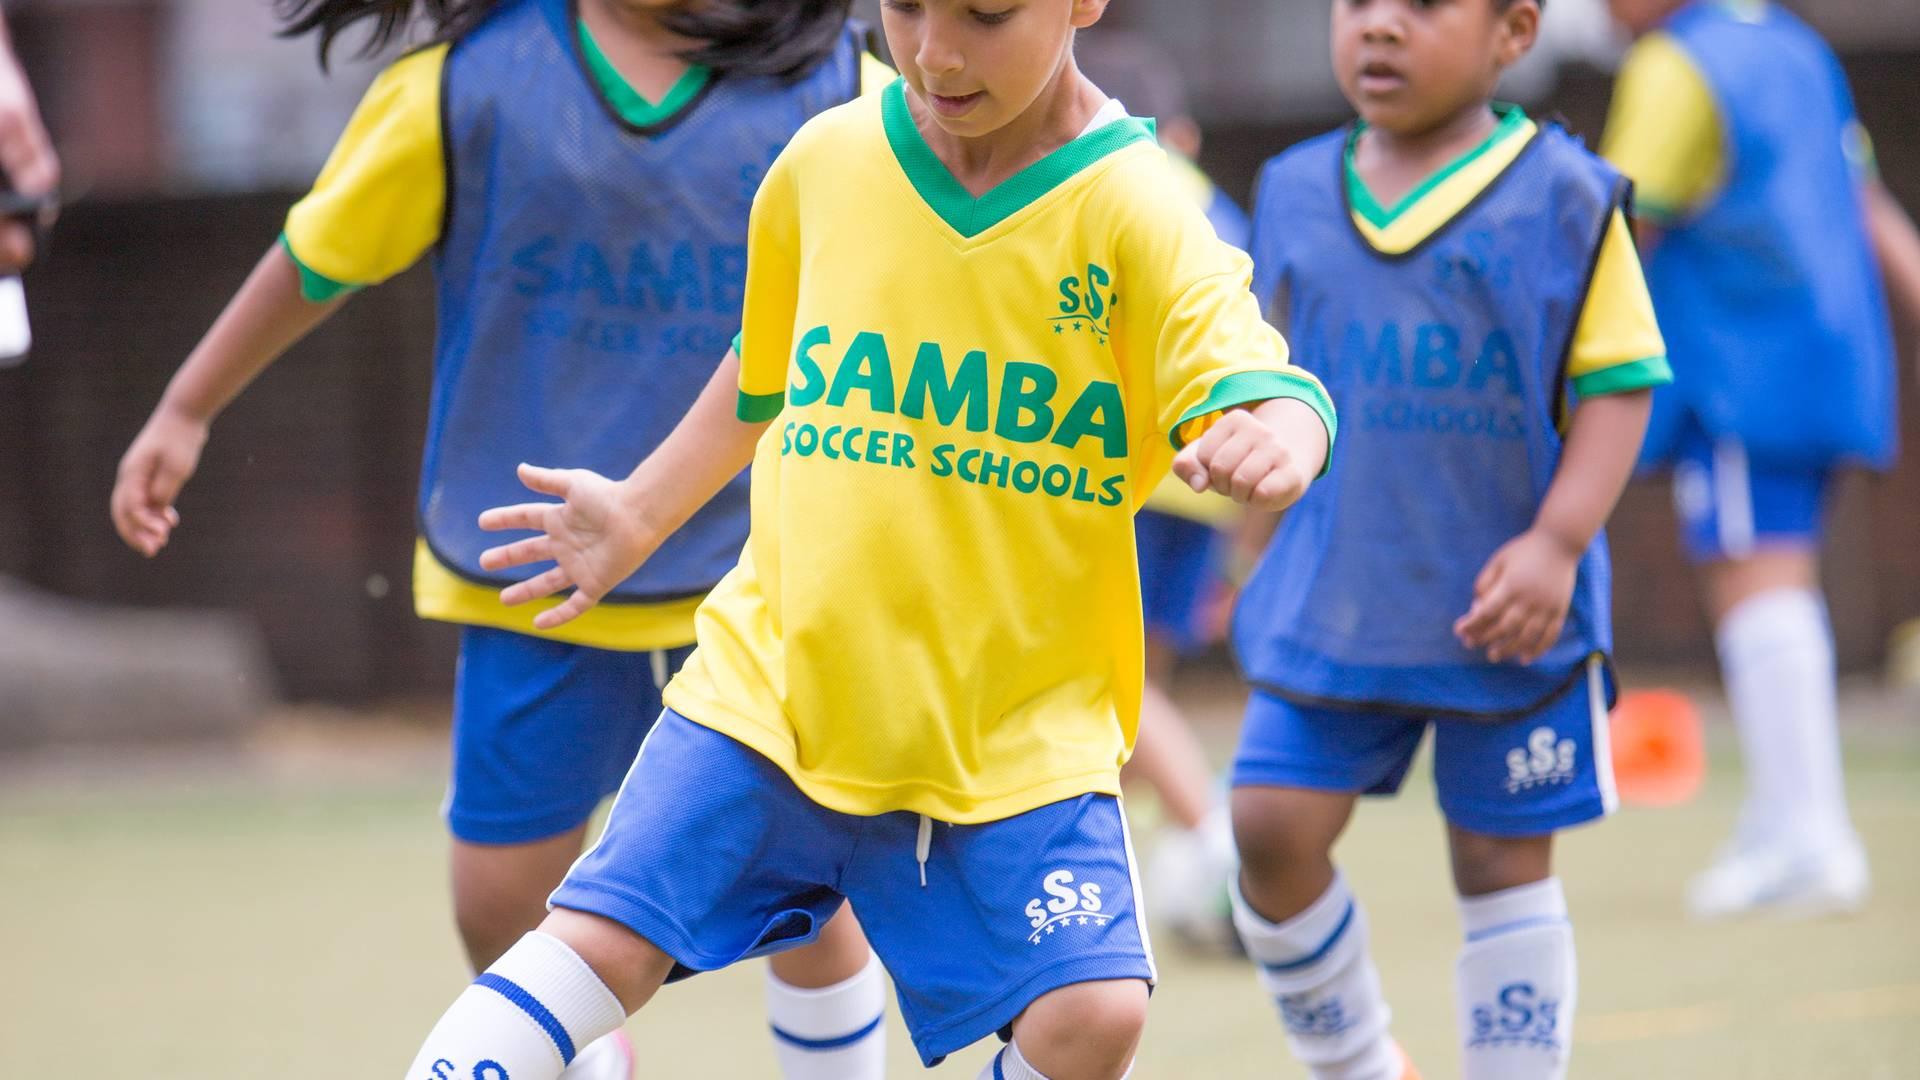 [Walthamstow] Football Classes for Kids aged 4-12 photo